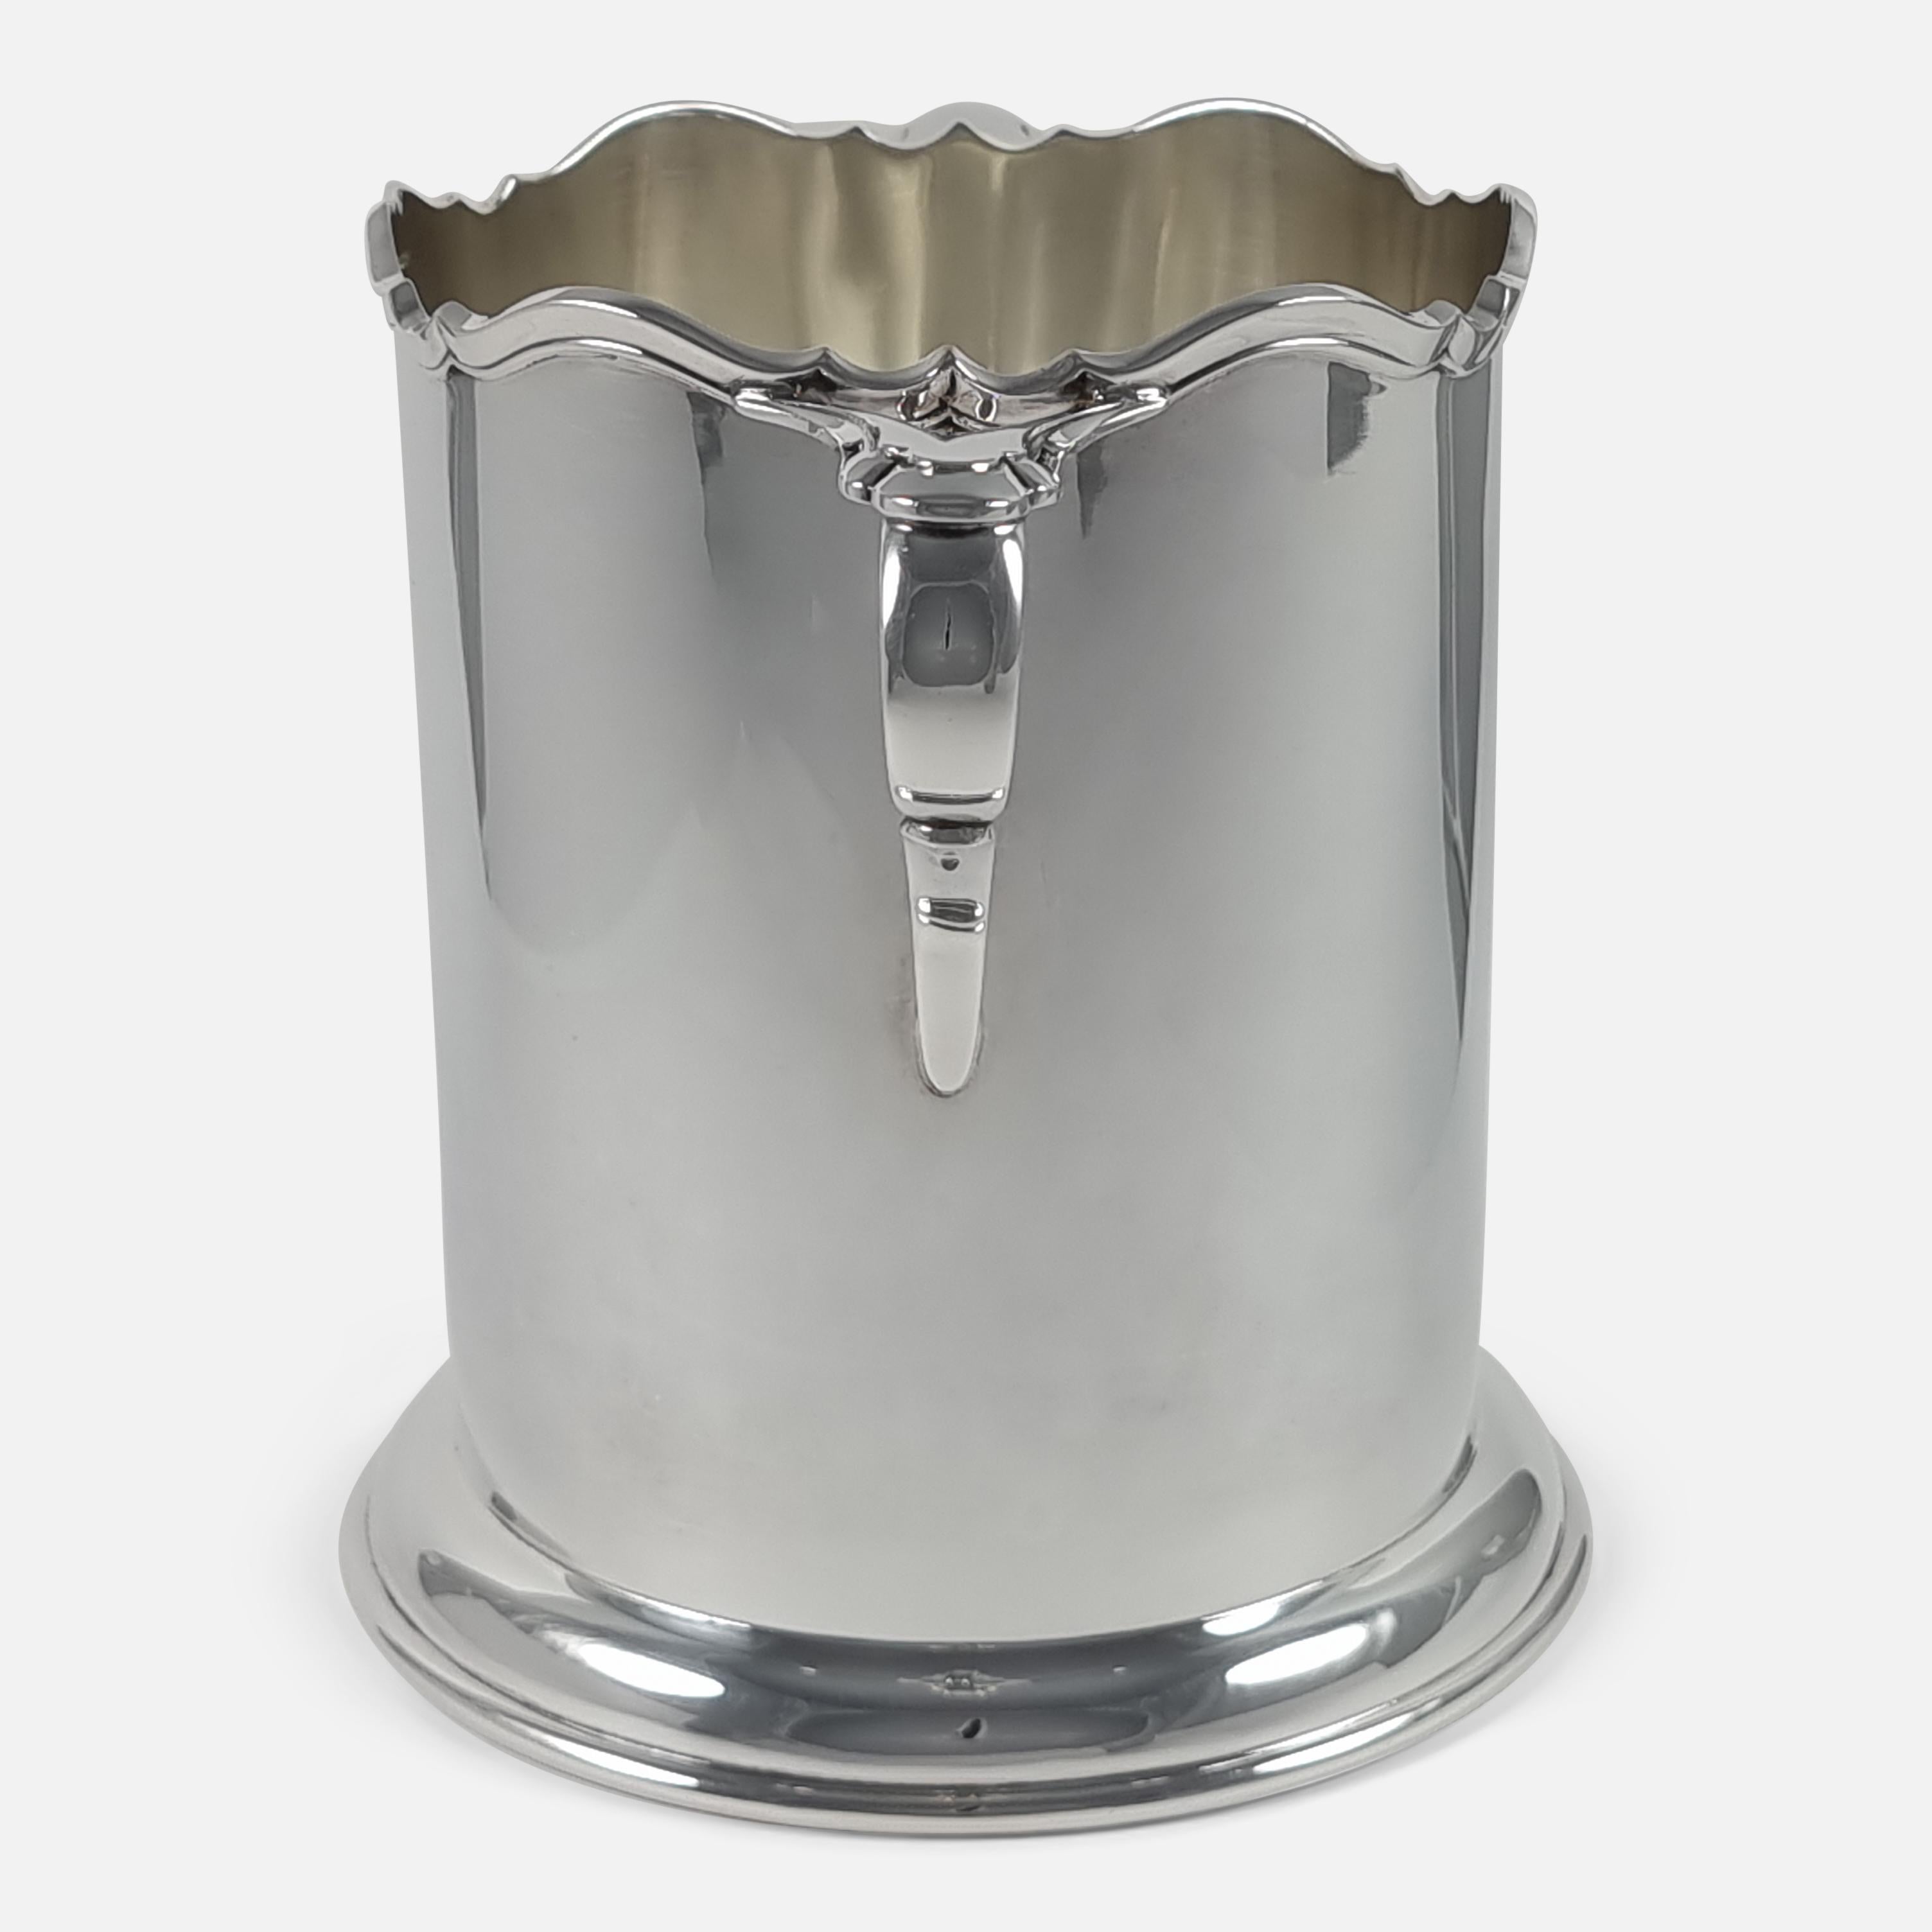 Mid-20th Century Edward VIII Sterling Silver Syphon Wine Bottle Holder, Atkin Brothers, 1936 For Sale